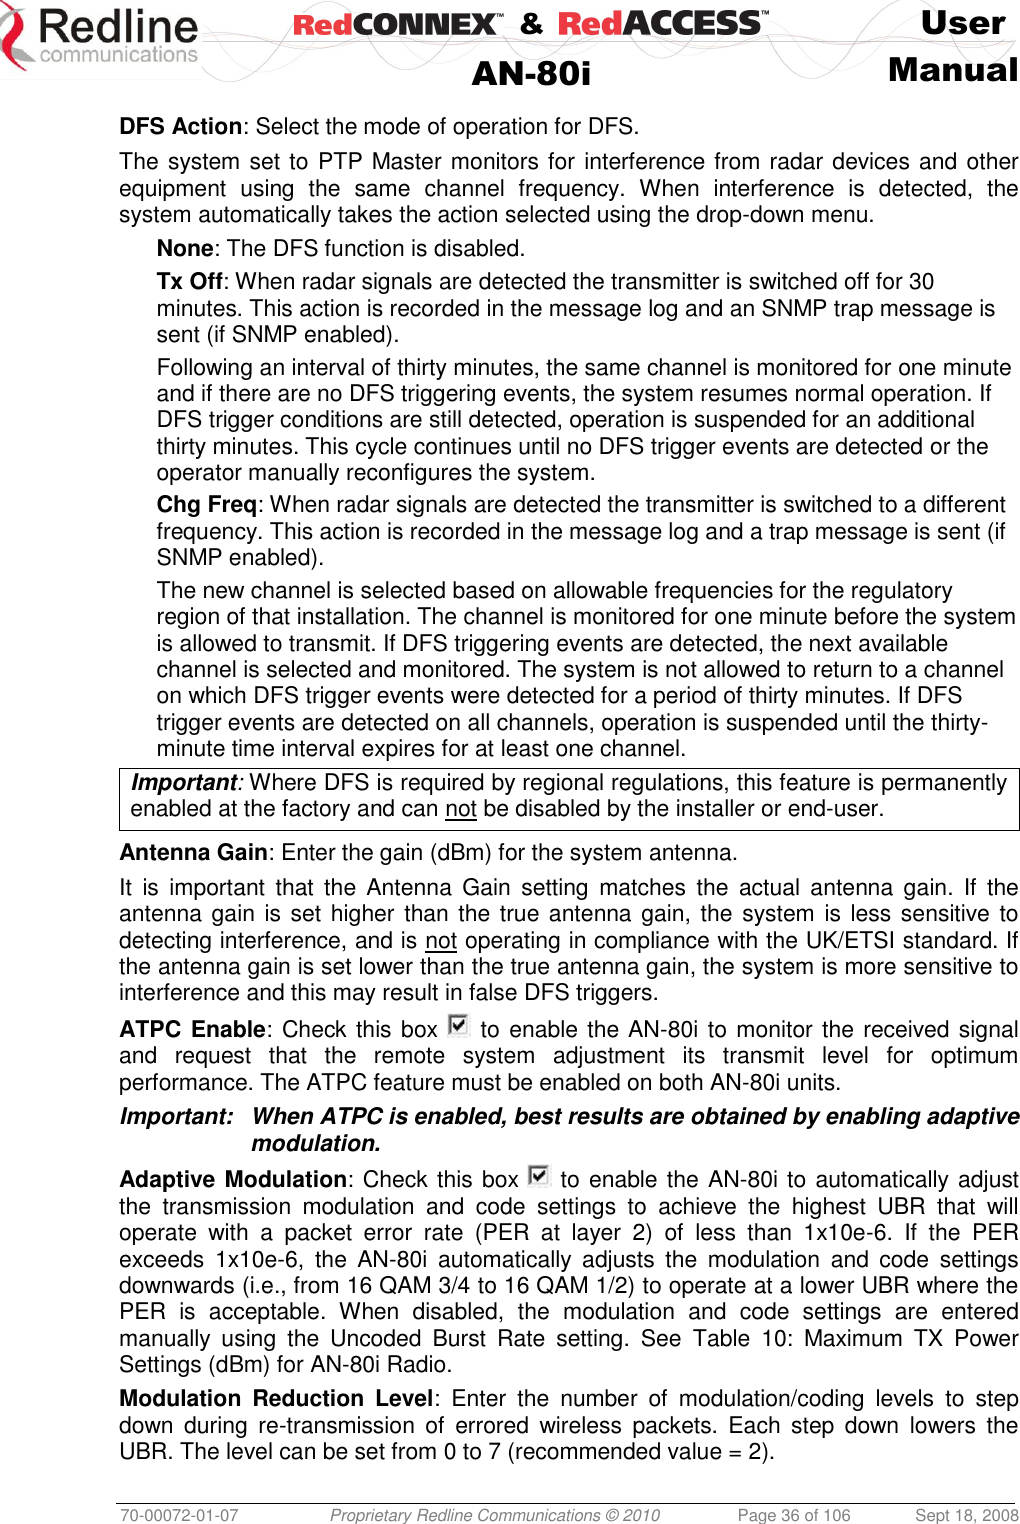    &amp;  User  AN-80i Manual  70-00072-01-07 Proprietary Redline Communications © 2010  Page 36 of 106  Sept 18, 2008  DFS Action: Select the mode of operation for DFS. The system set to PTP Master monitors for interference from radar devices and other equipment  using  the  same  channel  frequency.  When  interference  is  detected,  the system automatically takes the action selected using the drop-down menu. None: The DFS function is disabled. Tx Off: When radar signals are detected the transmitter is switched off for 30 minutes. This action is recorded in the message log and an SNMP trap message is sent (if SNMP enabled). Following an interval of thirty minutes, the same channel is monitored for one minute and if there are no DFS triggering events, the system resumes normal operation. If DFS trigger conditions are still detected, operation is suspended for an additional thirty minutes. This cycle continues until no DFS trigger events are detected or the operator manually reconfigures the system. Chg Freq: When radar signals are detected the transmitter is switched to a different frequency. This action is recorded in the message log and a trap message is sent (if SNMP enabled). The new channel is selected based on allowable frequencies for the regulatory region of that installation. The channel is monitored for one minute before the system is allowed to transmit. If DFS triggering events are detected, the next available channel is selected and monitored. The system is not allowed to return to a channel on which DFS trigger events were detected for a period of thirty minutes. If DFS trigger events are detected on all channels, operation is suspended until the thirty-minute time interval expires for at least one channel. Important: Where DFS is required by regional regulations, this feature is permanently enabled at the factory and can not be disabled by the installer or end-user.  Antenna Gain: Enter the gain (dBm) for the system antenna.  It  is  important  that  the  Antenna  Gain  setting  matches  the  actual  antenna  gain.  If  the antenna gain  is set higher than the true antenna gain, the system is less sensitive to detecting interference, and is not operating in compliance with the UK/ETSI standard. If the antenna gain is set lower than the true antenna gain, the system is more sensitive to interference and this may result in false DFS triggers. ATPC Enable: Check this box   to enable the AN-80i to monitor the received signal and  request  that  the  remote  system  adjustment  its  transmit  level  for  optimum performance. The ATPC feature must be enabled on both AN-80i units. Important:  When ATPC is enabled, best results are obtained by enabling adaptive modulation. Adaptive Modulation: Check this box   to enable the AN-80i to automatically adjust the  transmission  modulation  and  code  settings  to  achieve  the  highest  UBR  that  will operate  with  a  packet  error  rate  (PER  at  layer  2)  of  less  than  1x10e-6.  If  the  PER exceeds  1x10e-6,  the  AN-80i  automatically  adjusts  the  modulation  and  code  settings downwards (i.e., from 16 QAM 3/4 to 16 QAM 1/2) to operate at a lower UBR where the PER  is  acceptable.  When  disabled,  the  modulation  and  code  settings  are  entered manually  using  the  Uncoded  Burst  Rate  setting.  See  Table  10:  Maximum  TX  Power Settings (dBm) for AN-80i Radio. Modulation  Reduction  Level:  Enter  the  number  of  modulation/coding  levels  to  step down  during  re-transmission  of  errored  wireless  packets.  Each  step  down  lowers  the UBR. The level can be set from 0 to 7 (recommended value = 2). 